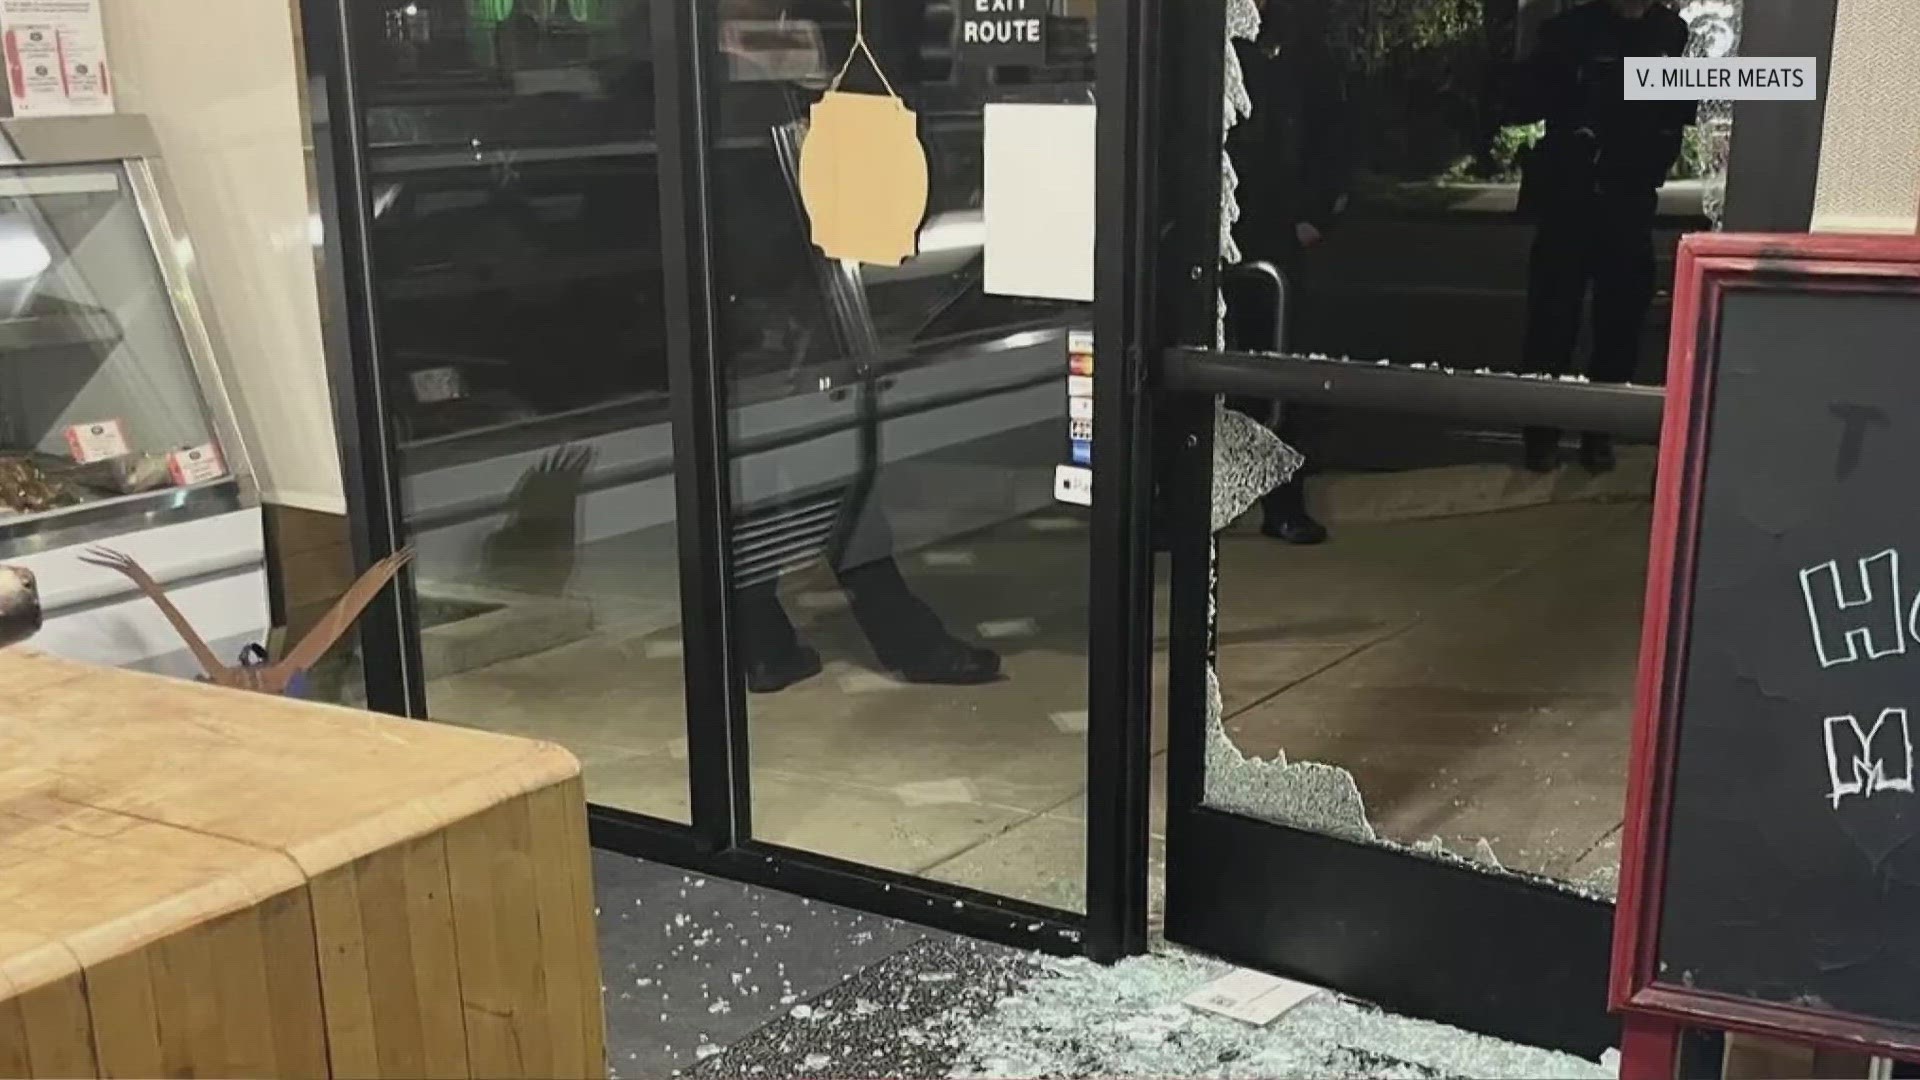 Five popular Sacramento business were hit in a string of break-ins. The businesses are now tightening up security.